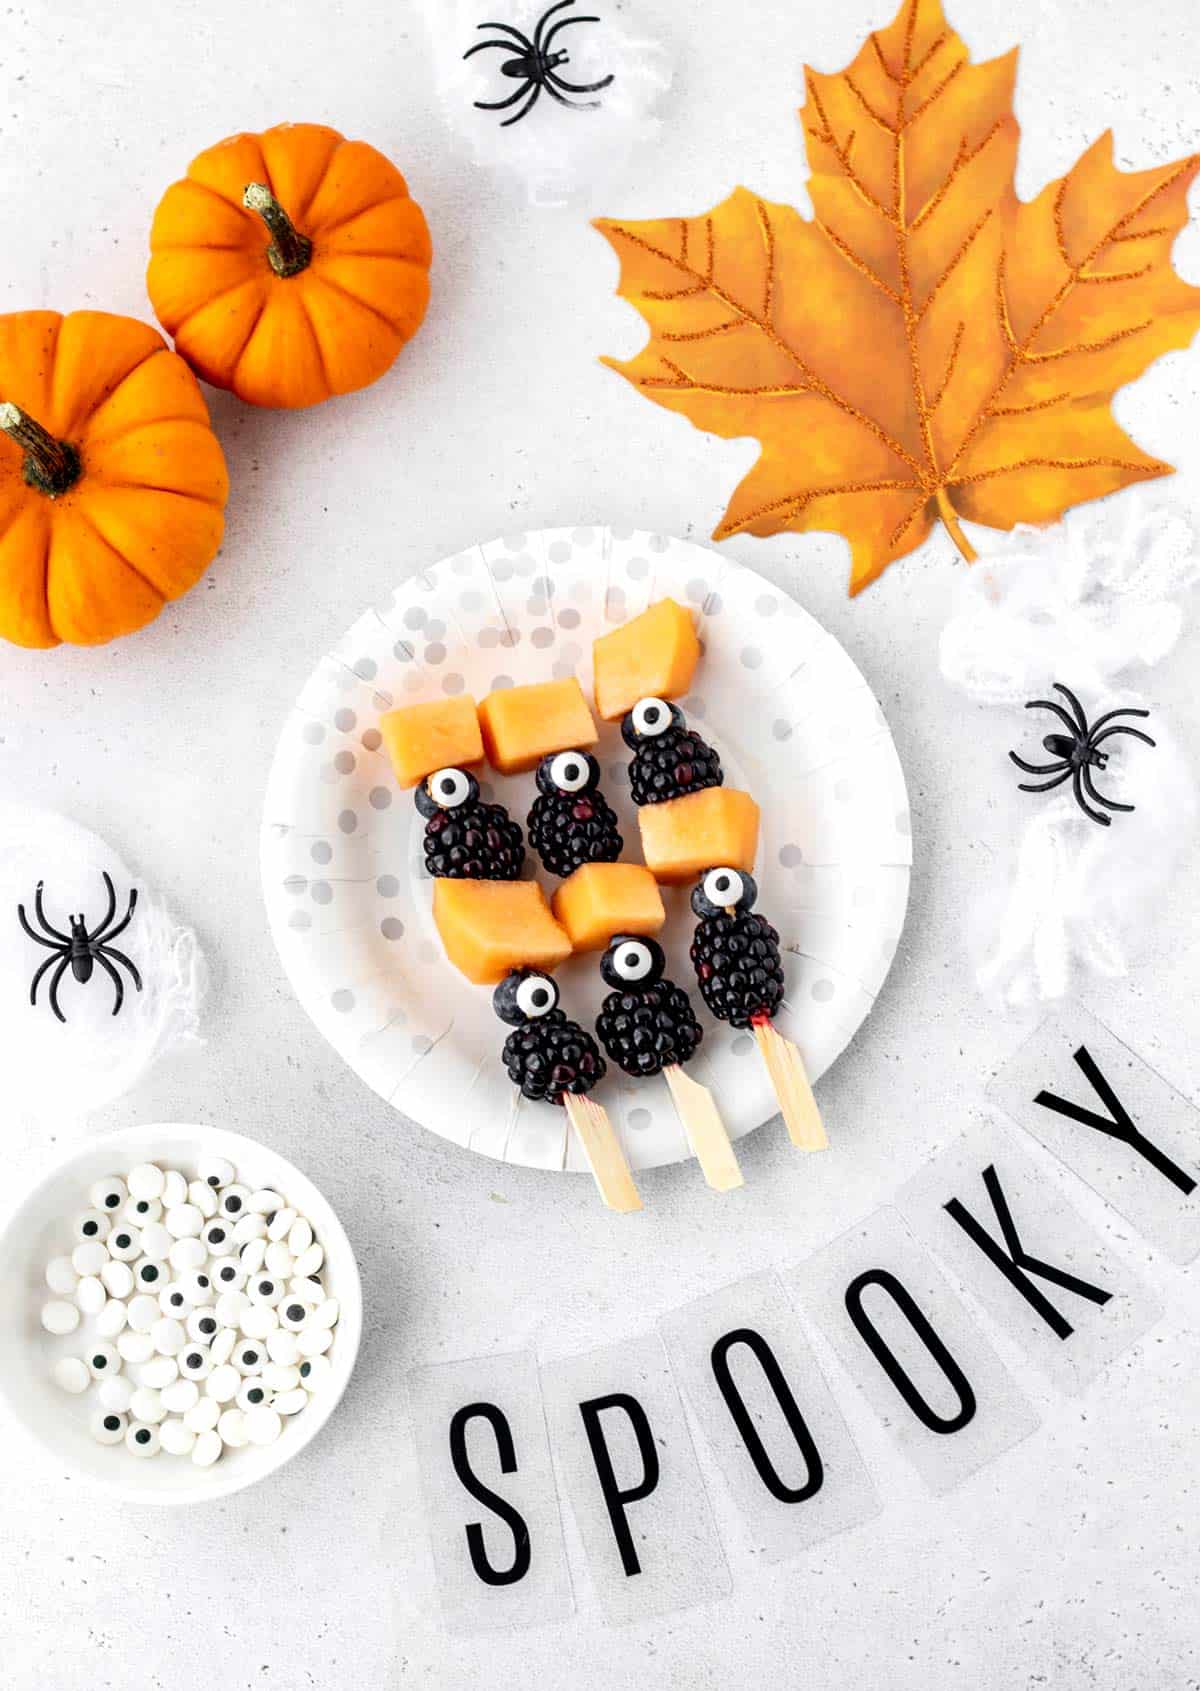 Three Halloween fruit kabobs on a plate with Halloween decorations.